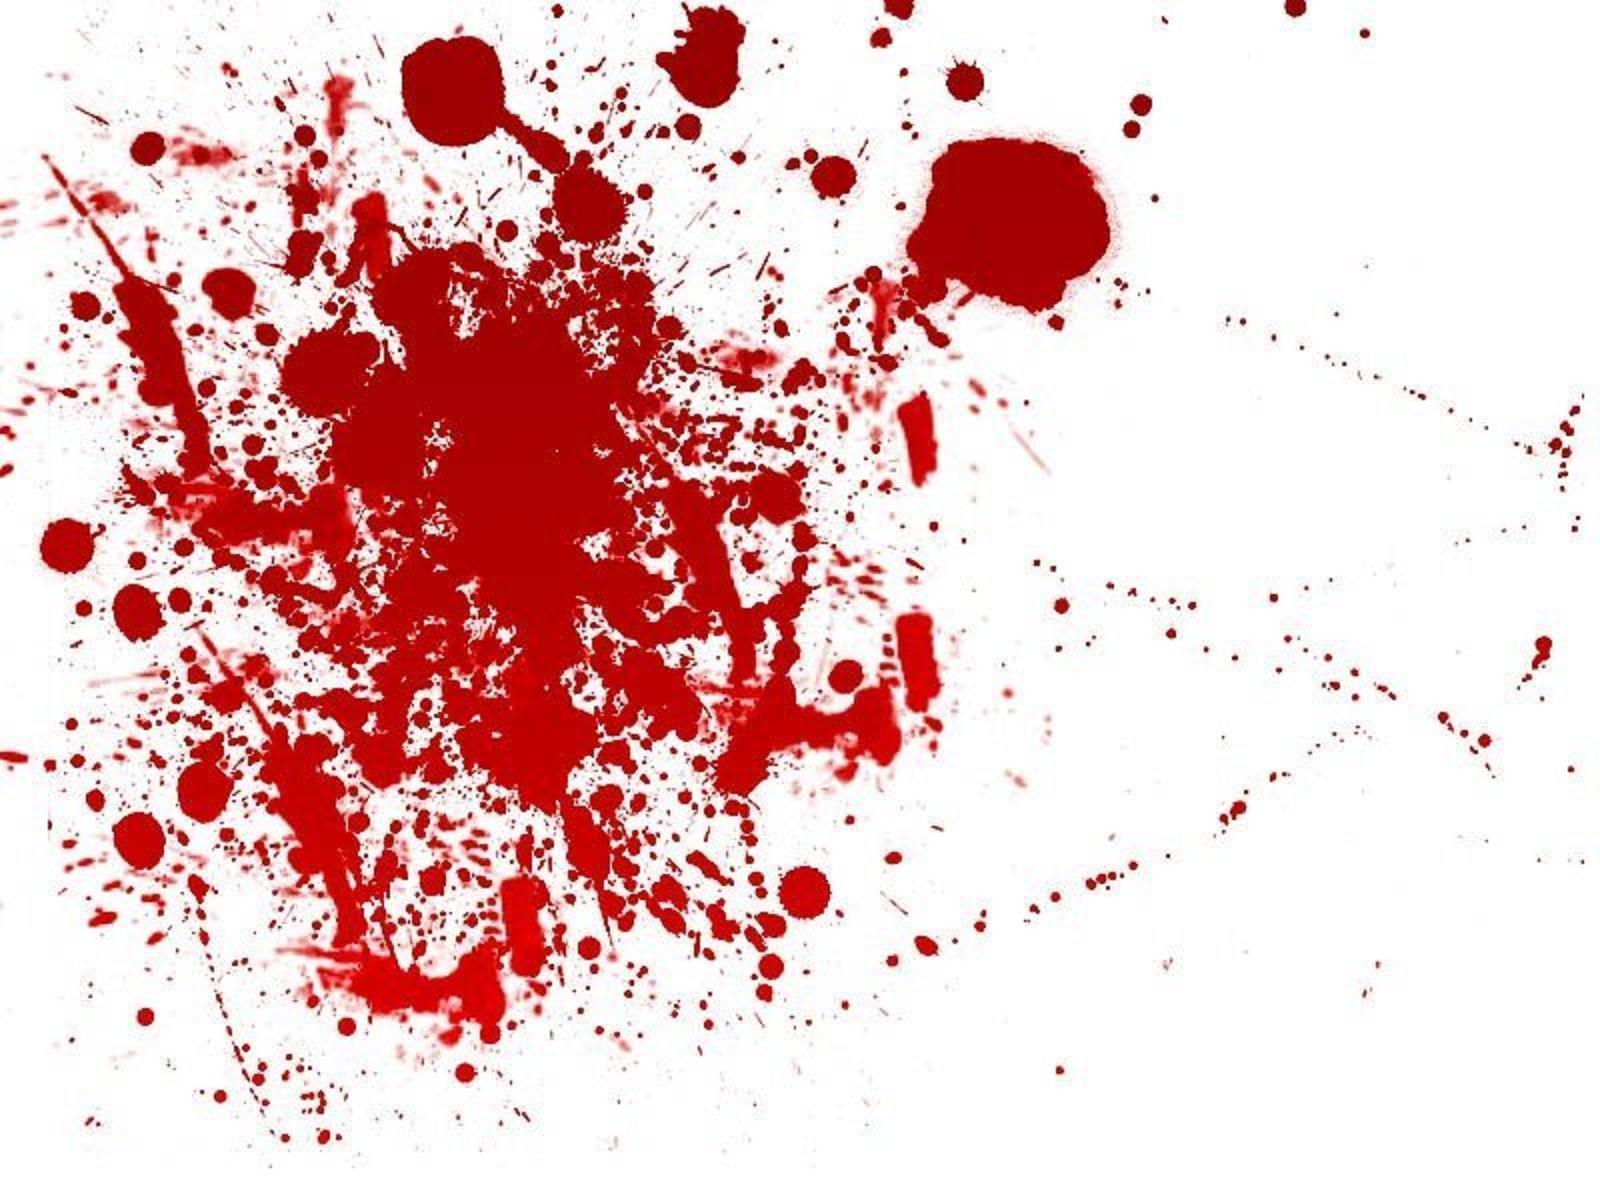 Human Blood images blood HD wallpaper and background photos 22467979 1600x1200